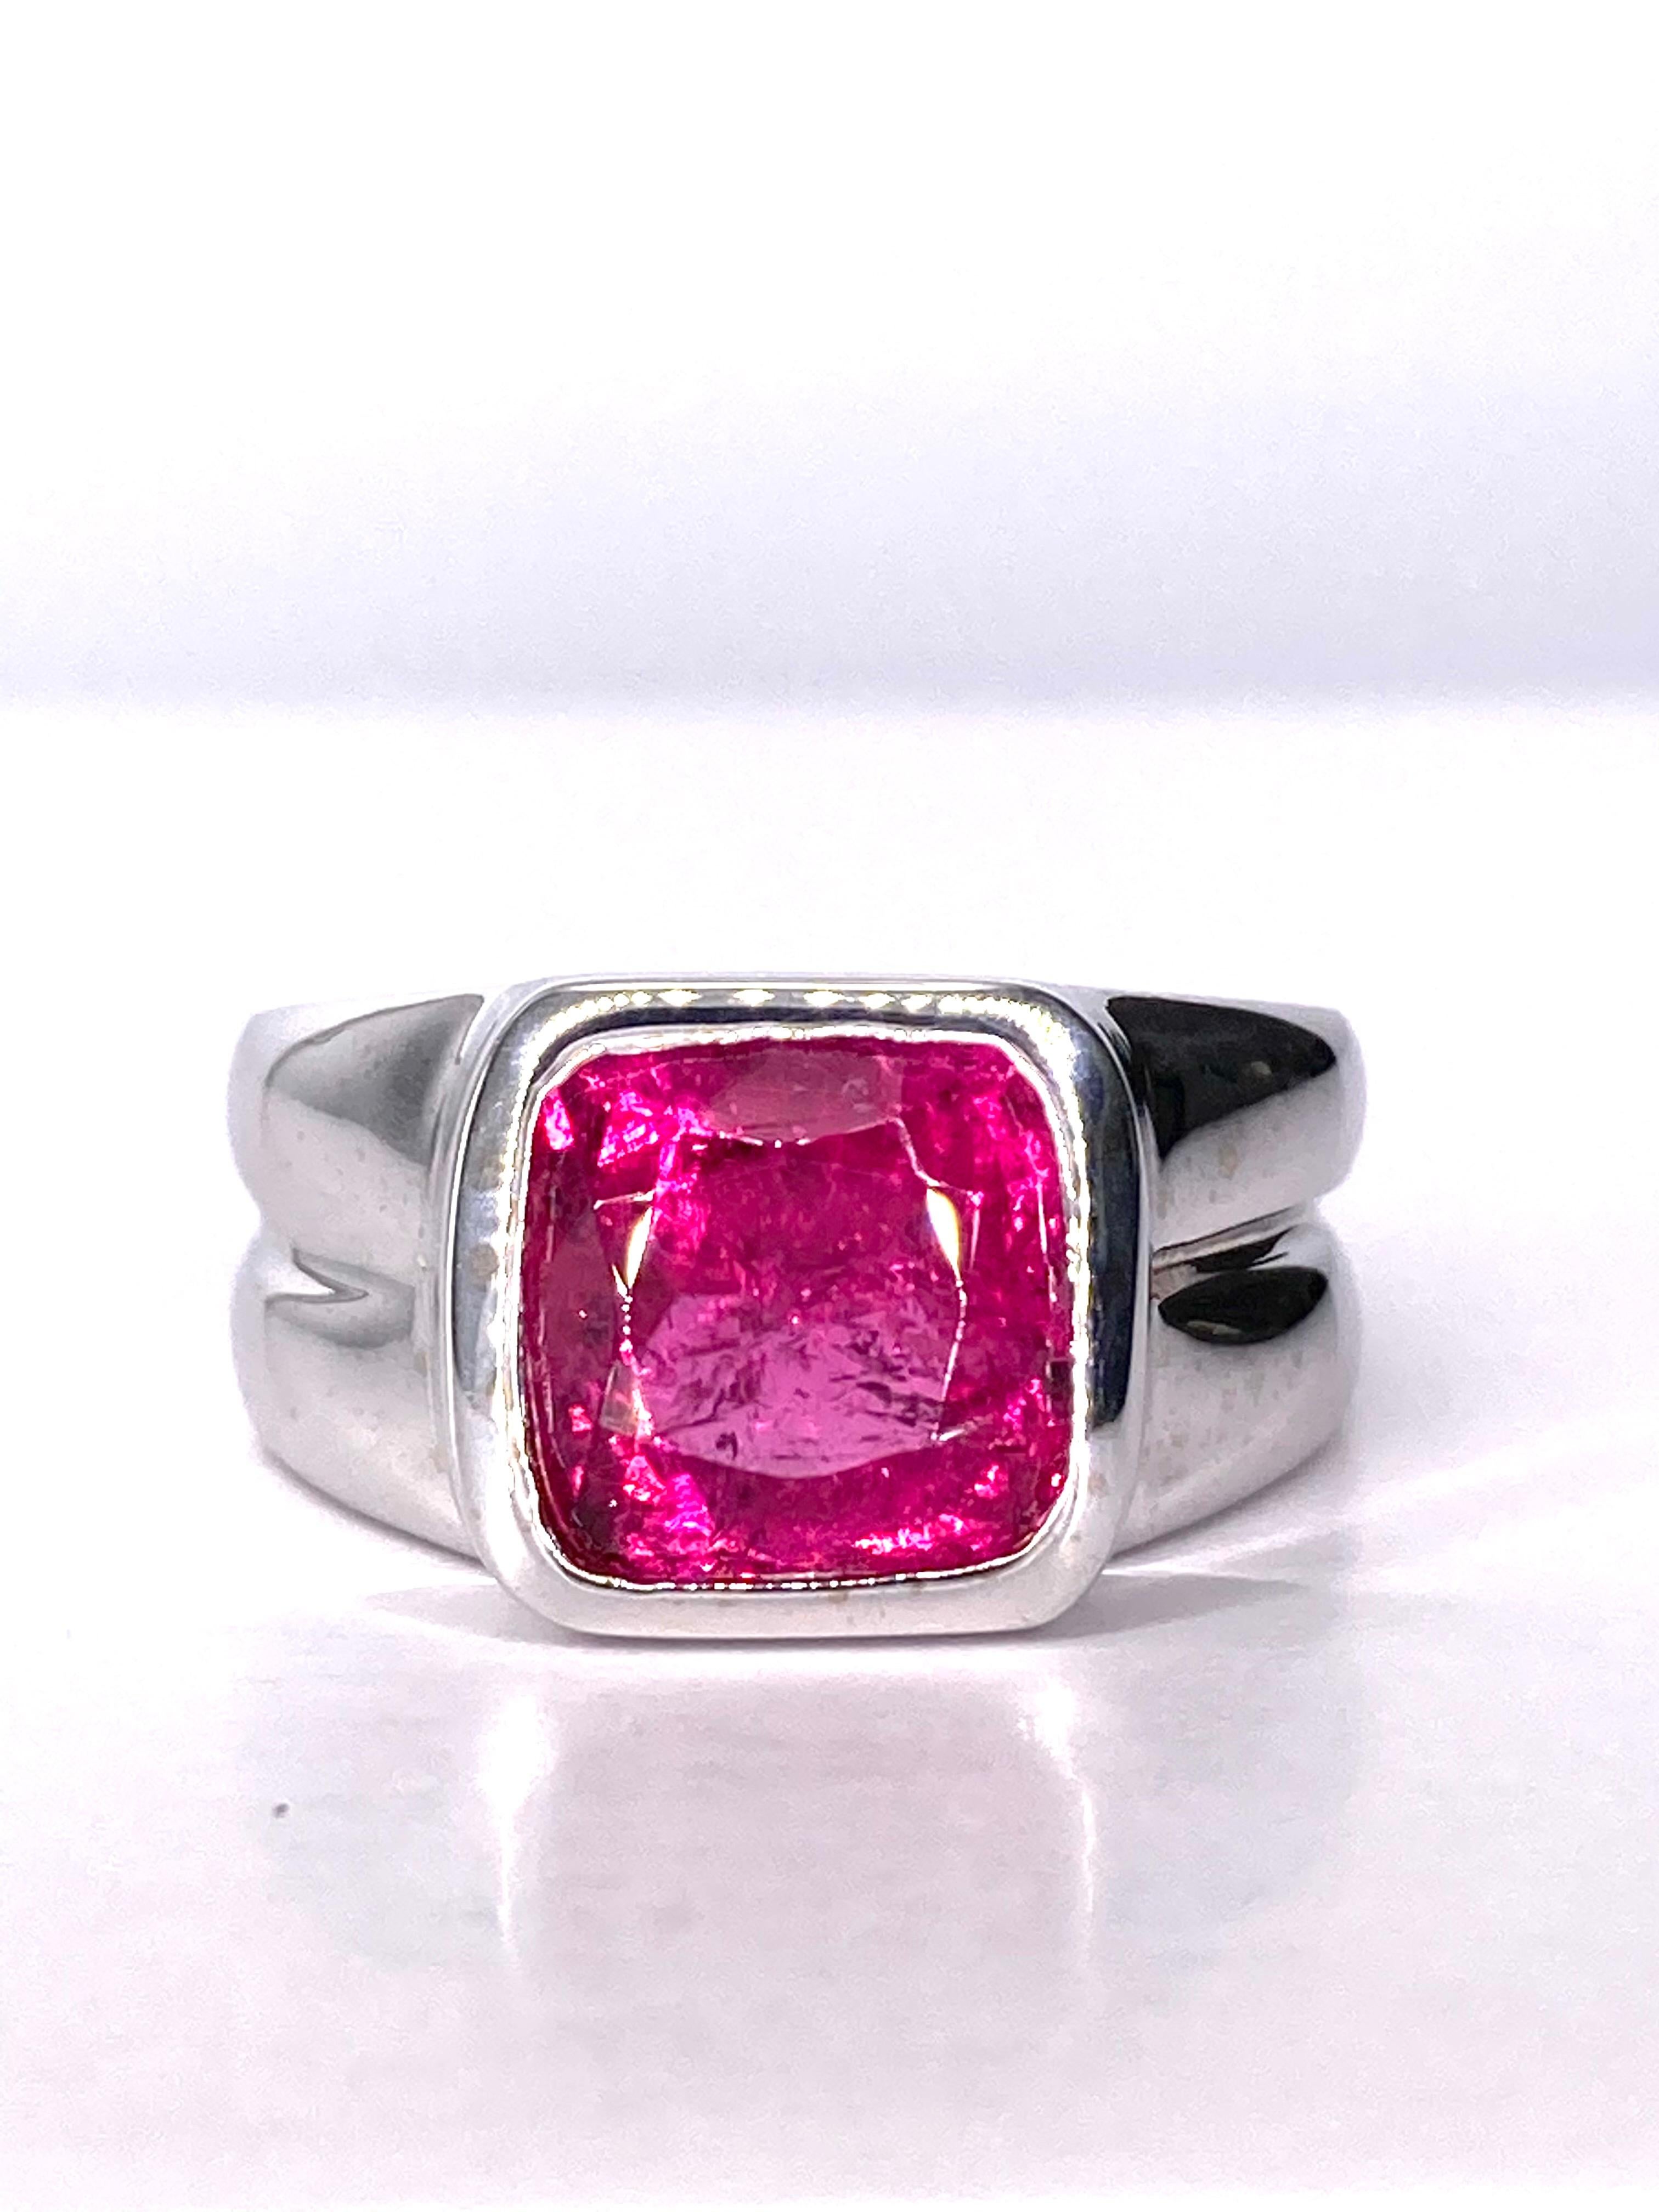 Pink Tourmaline graces the month of October with its special blend of compassion and wisdom. Long associated with unconditional love and friendship. This 4.5 Carat Tourmaline is bright pink and has very mysterious inclusions as if a cloud was